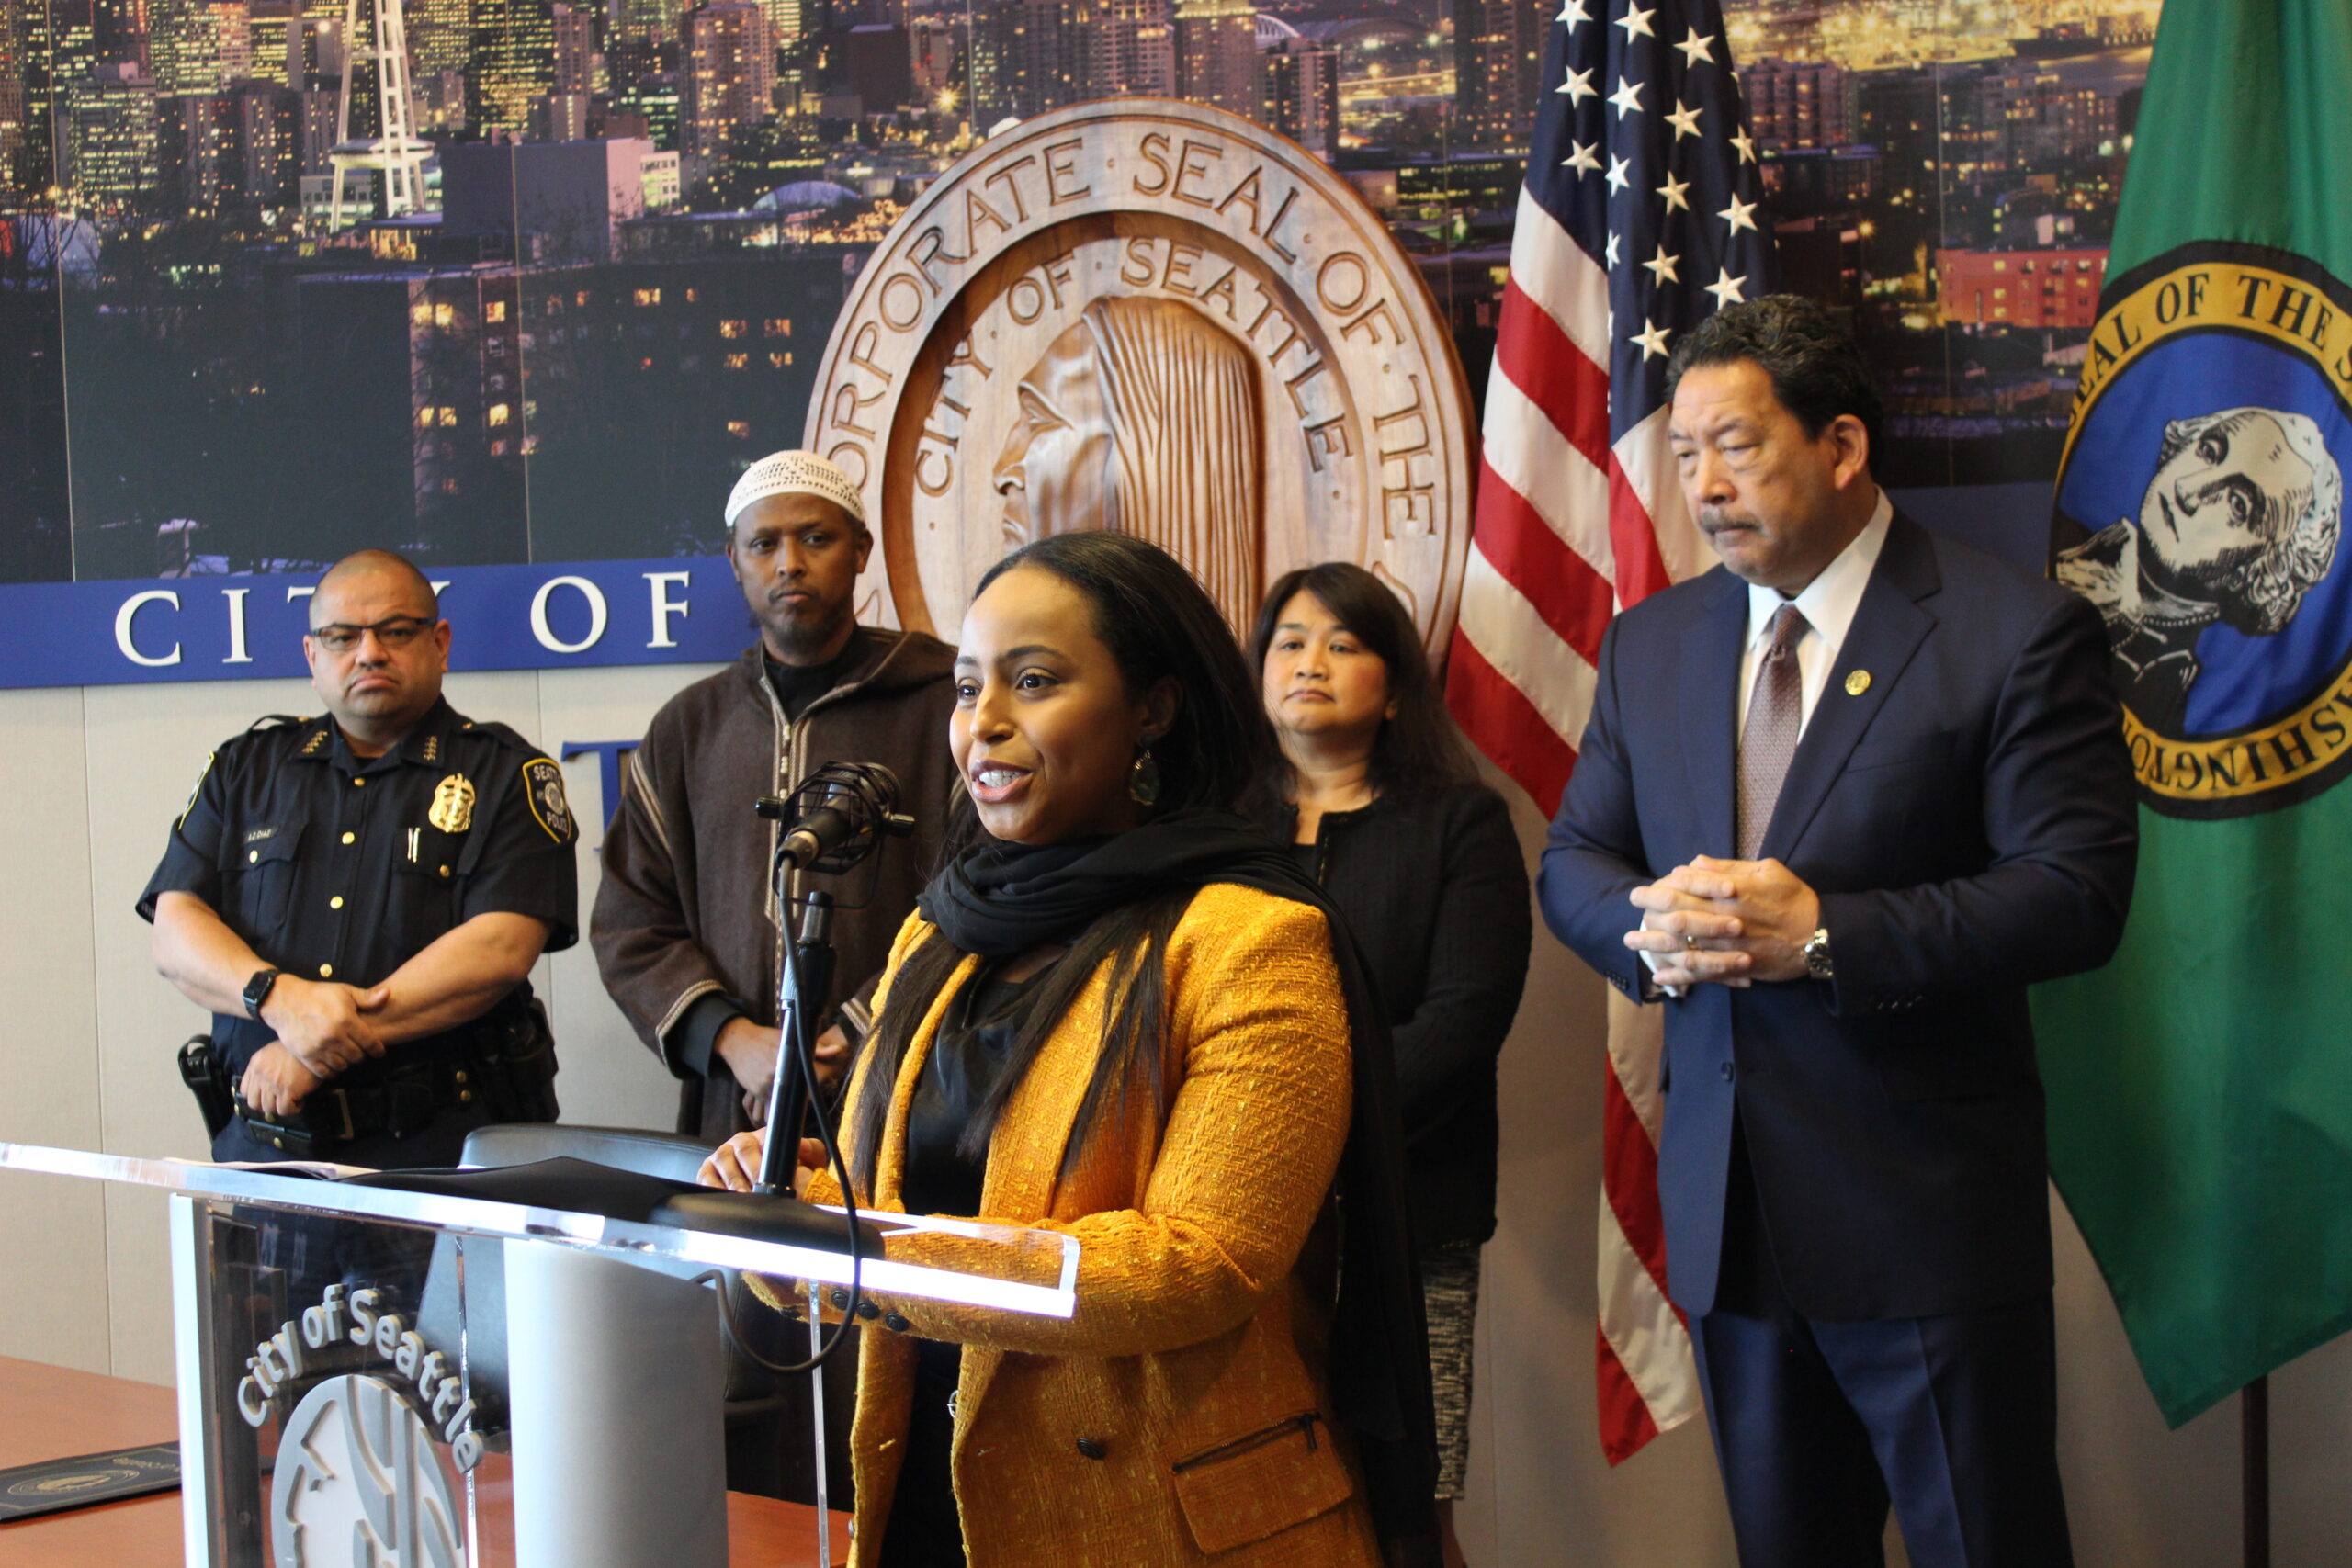 OIRA Director Mohamed speaking at podium at City Hall with Mayor Harrell and others standing behind her.